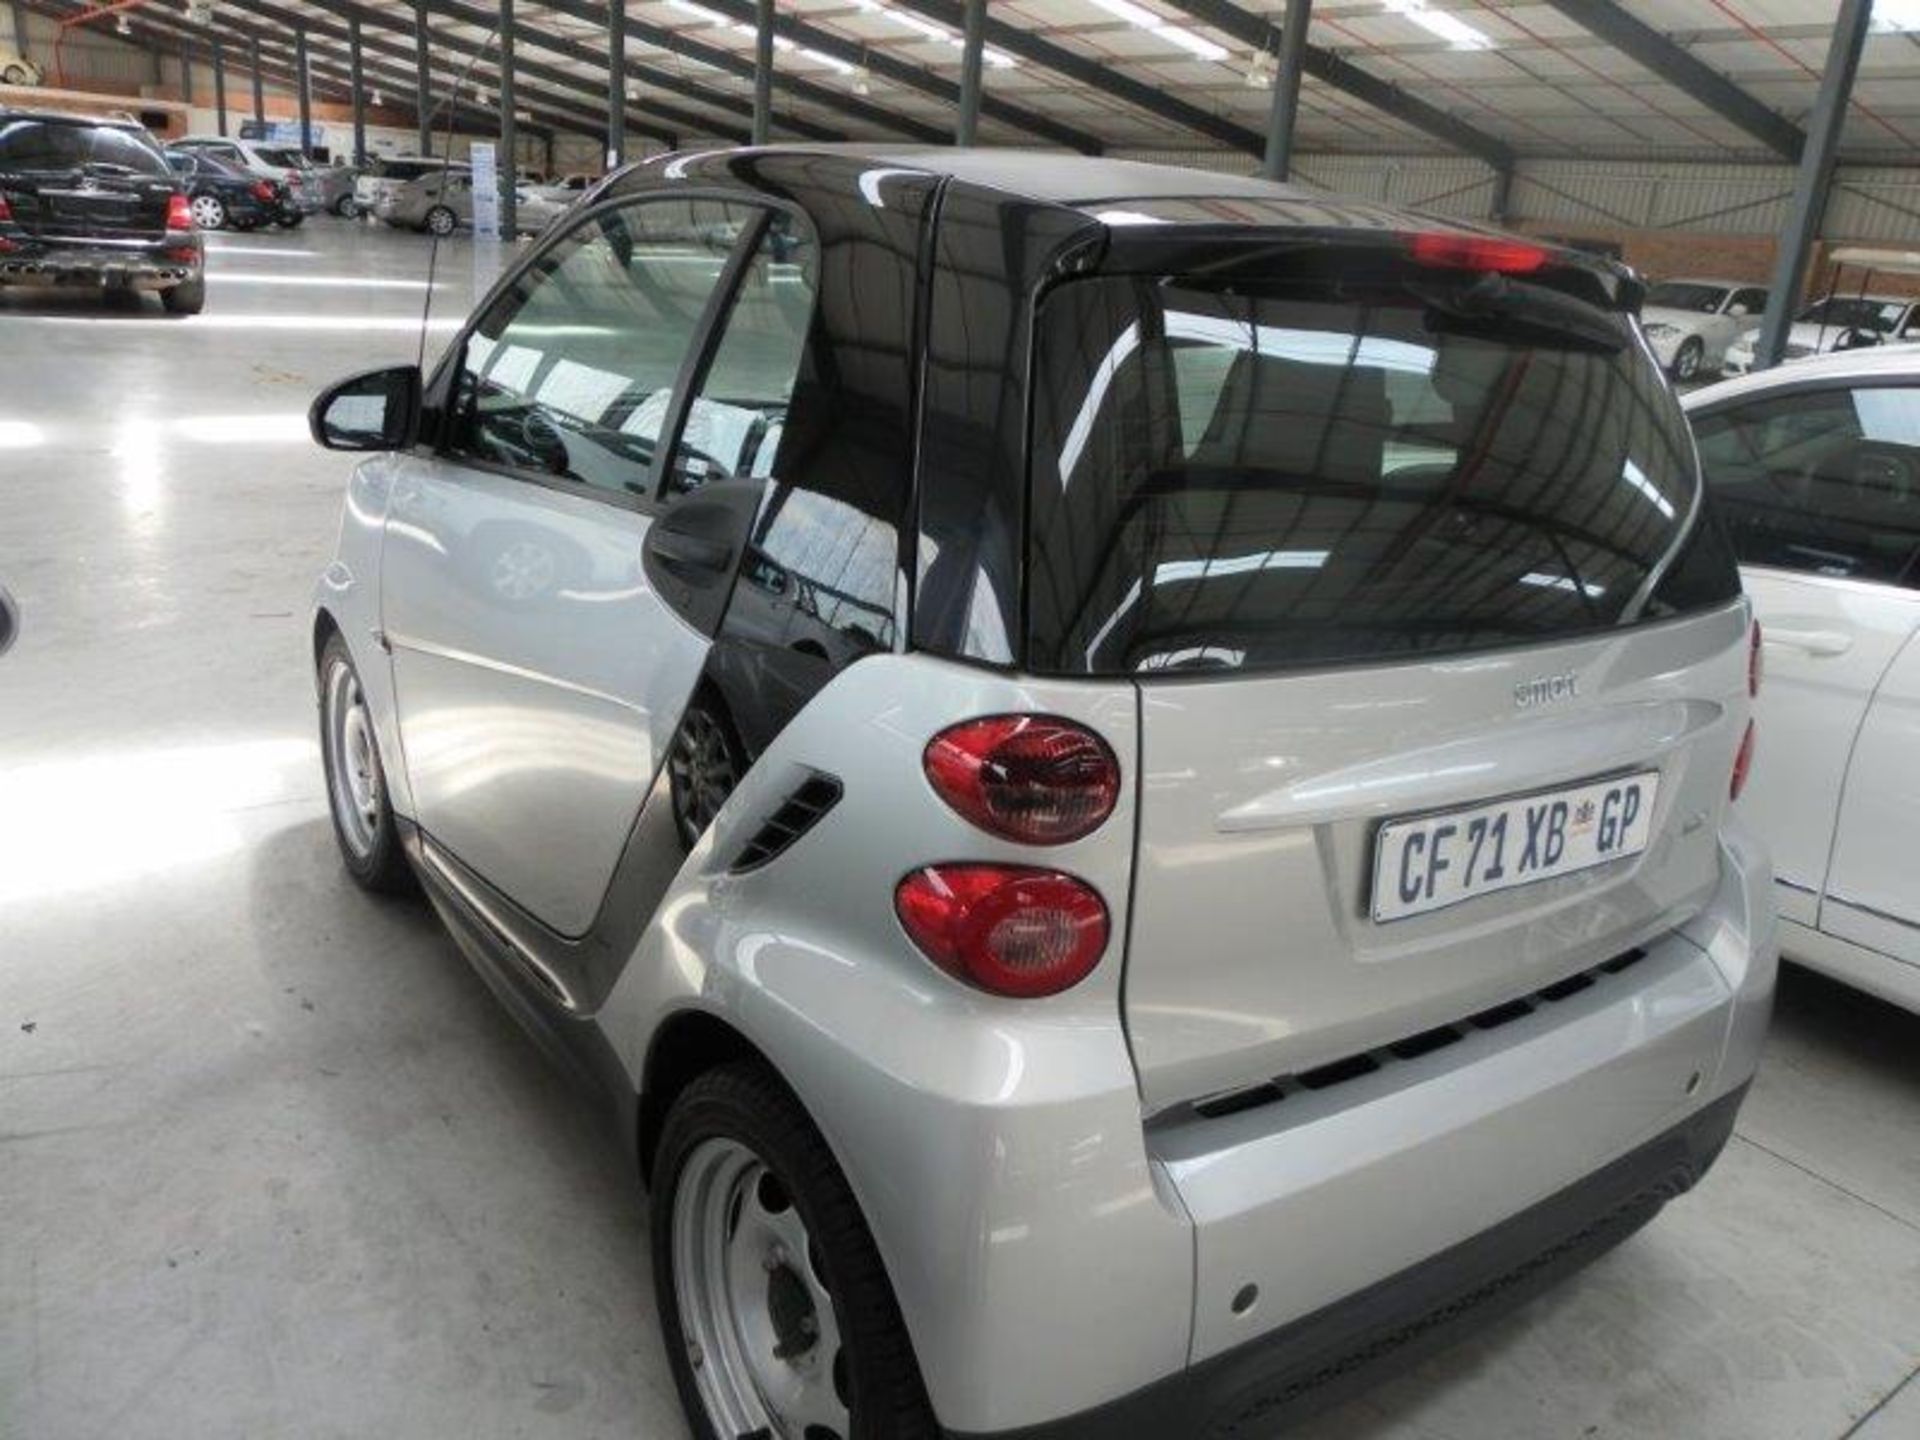 2012 CF71XBGP Smart For Two MHD Coupe Auto (Vin No: WME4513802K68304 )(47 515 kms) - Image 3 of 5